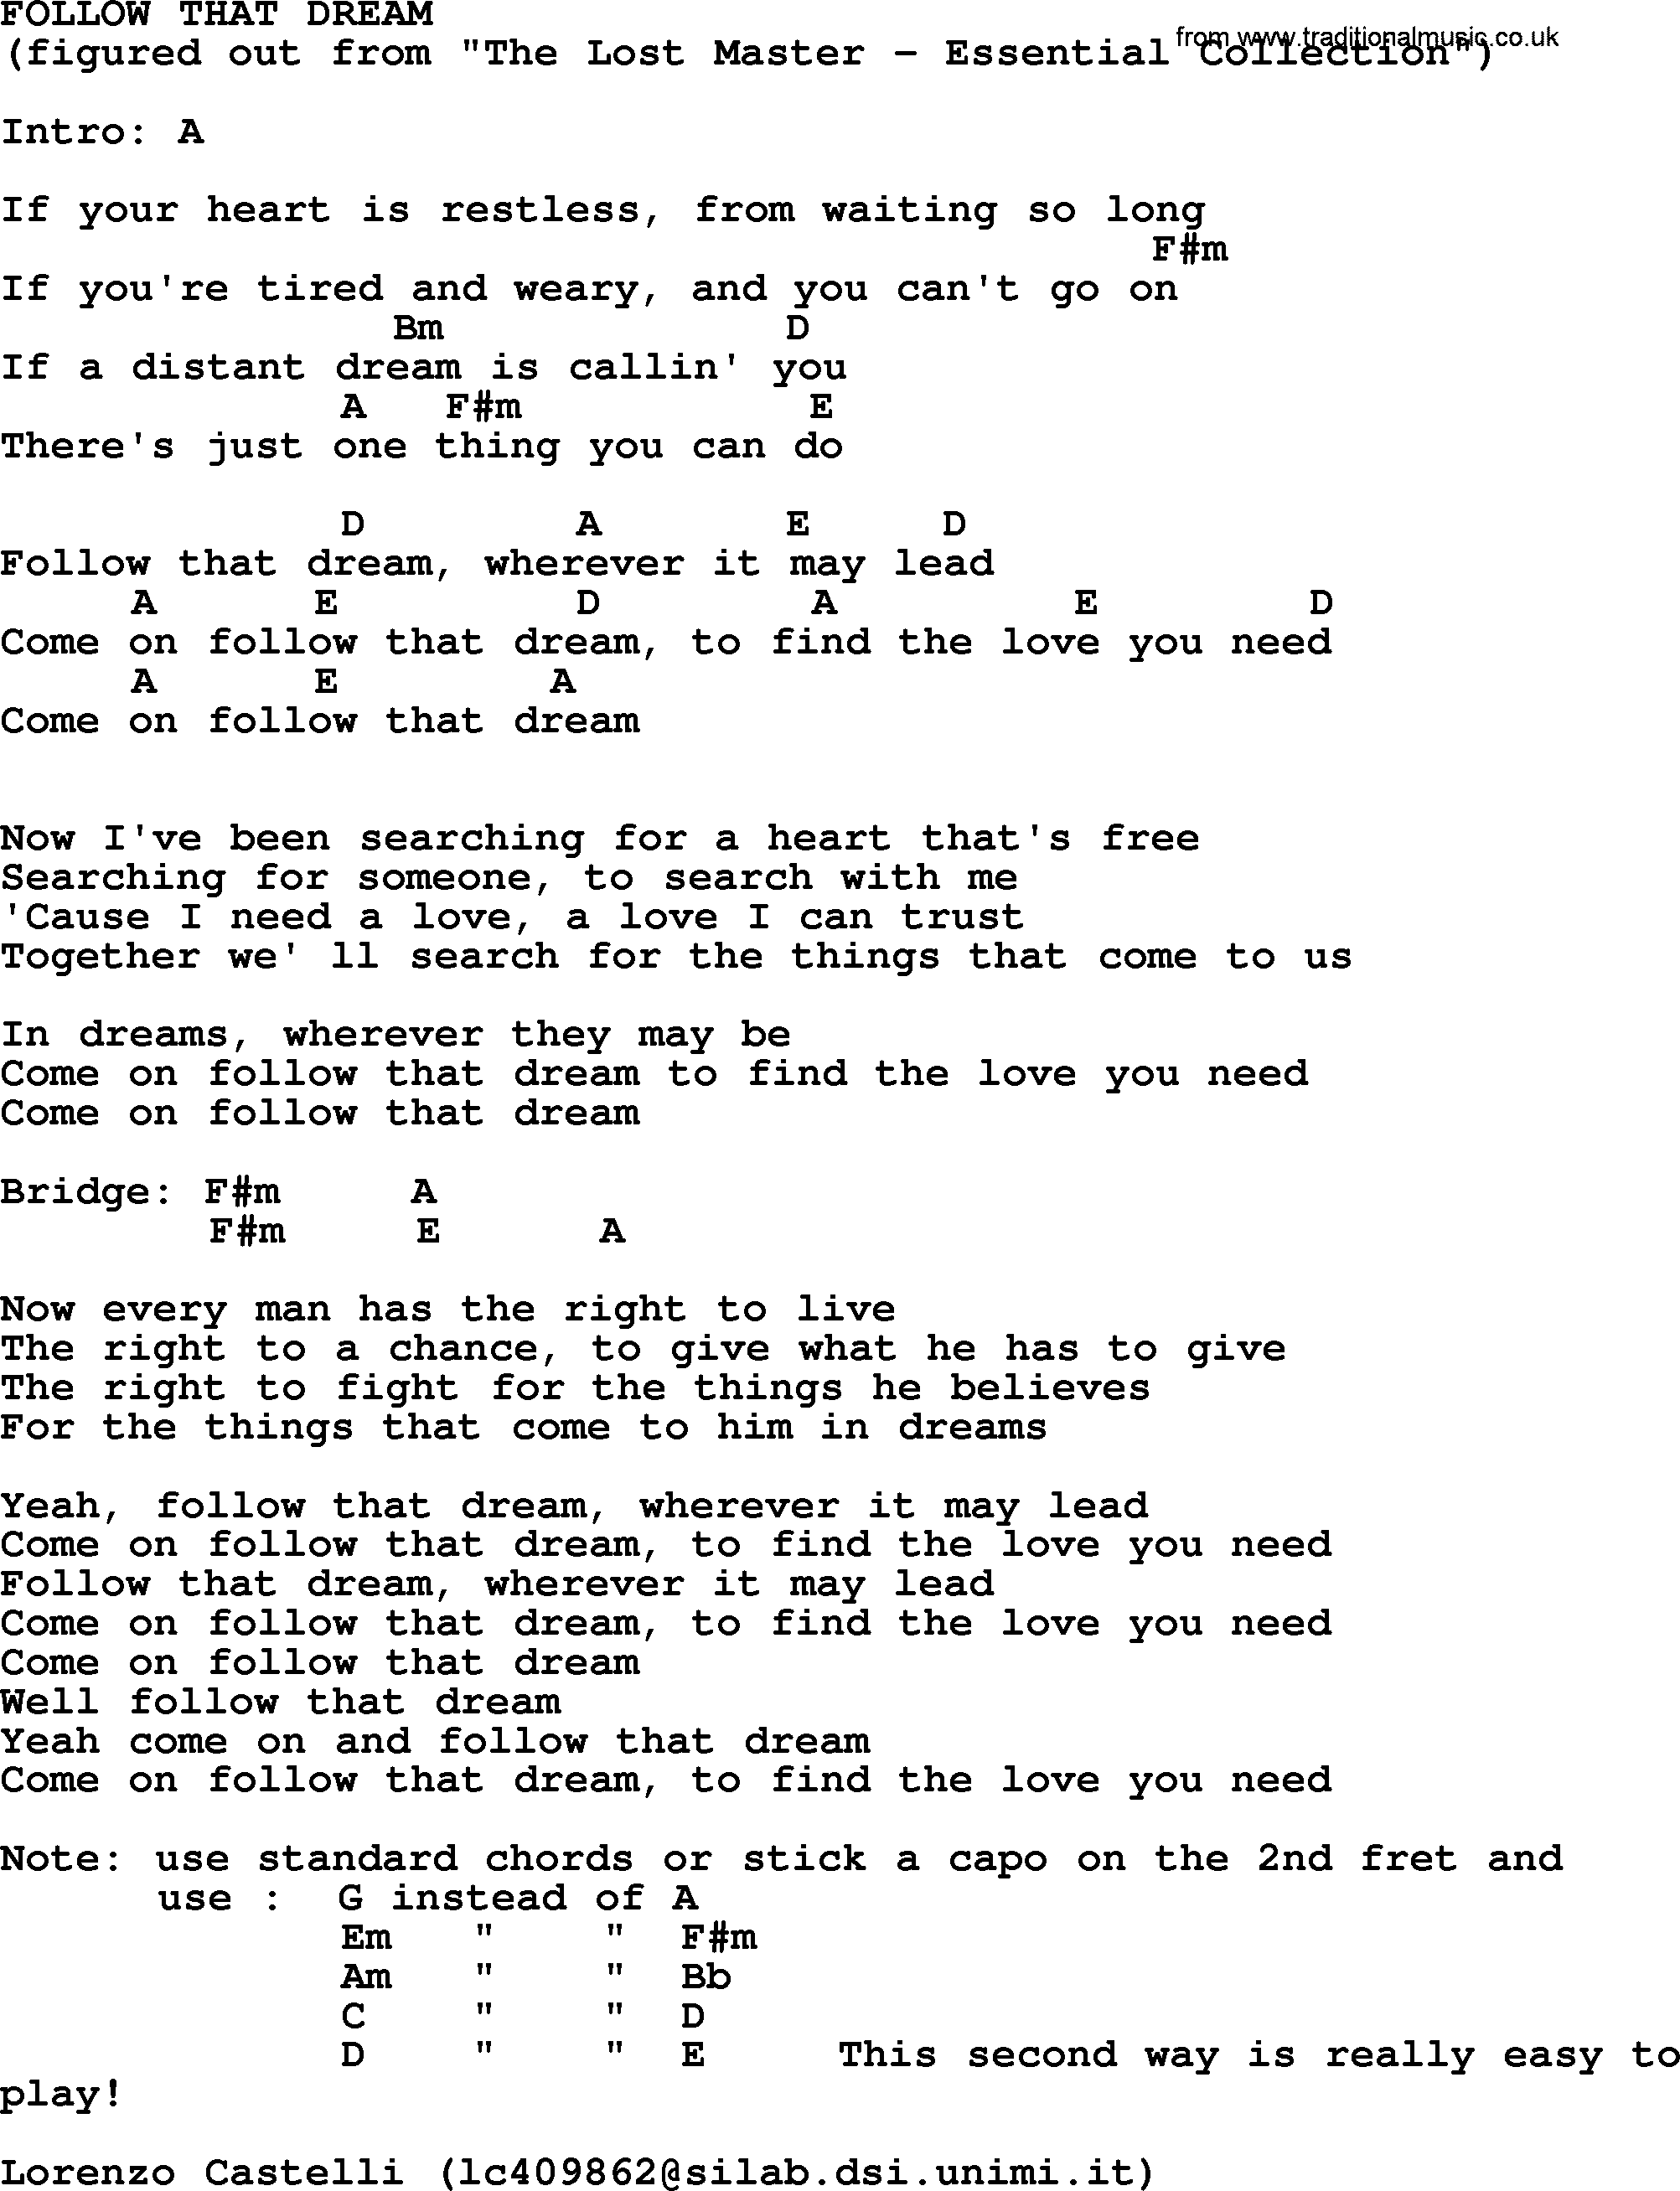 Bruce Springsteen song: Follow That Dream, lyrics and chords